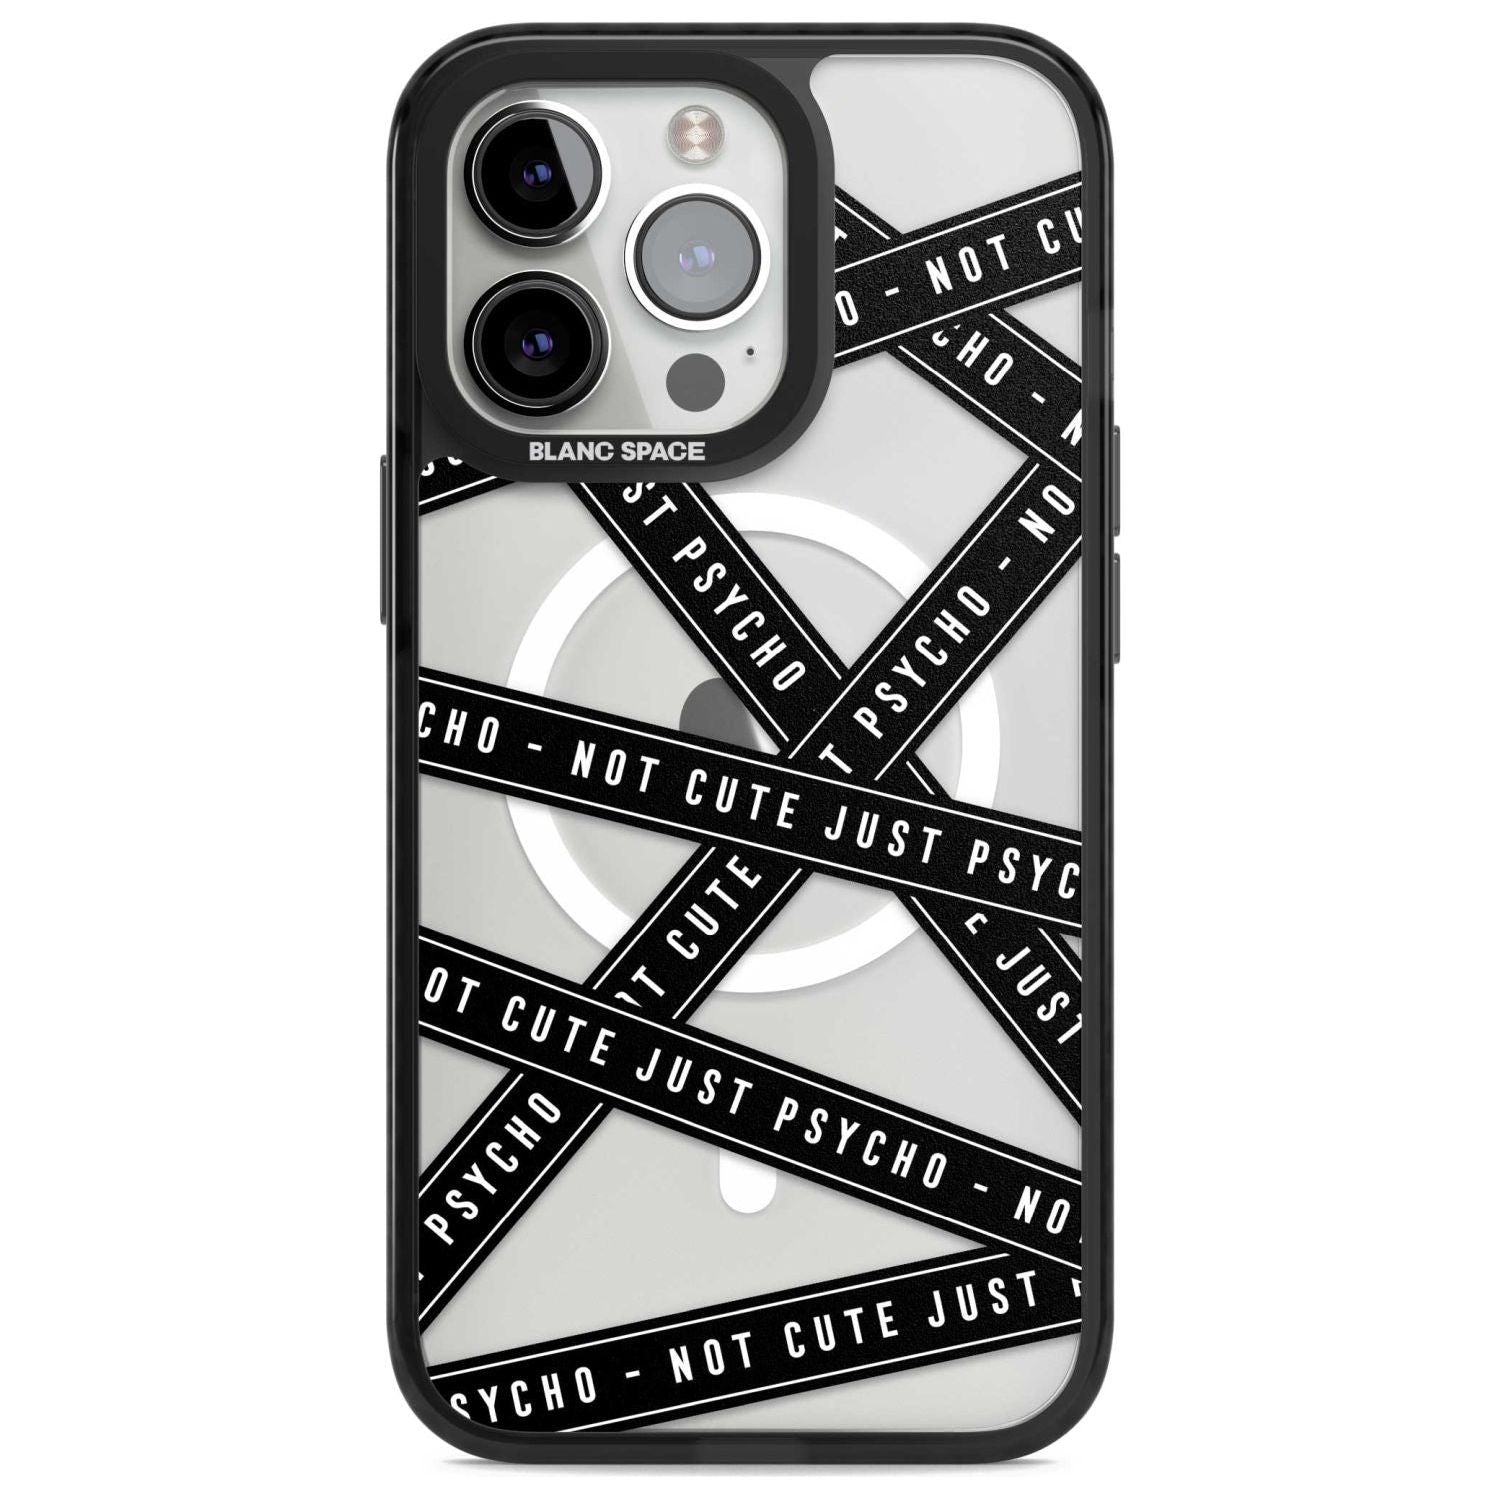 Caution Tape (Clear) Not Cute Just Psycho Phone Case iPhone 15 Pro Max / Magsafe Black Impact Case,iPhone 15 Pro / Magsafe Black Impact Case,iPhone 14 Pro Max / Magsafe Black Impact Case,iPhone 14 Pro / Magsafe Black Impact Case,iPhone 13 Pro / Magsafe Black Impact Case Blanc Space